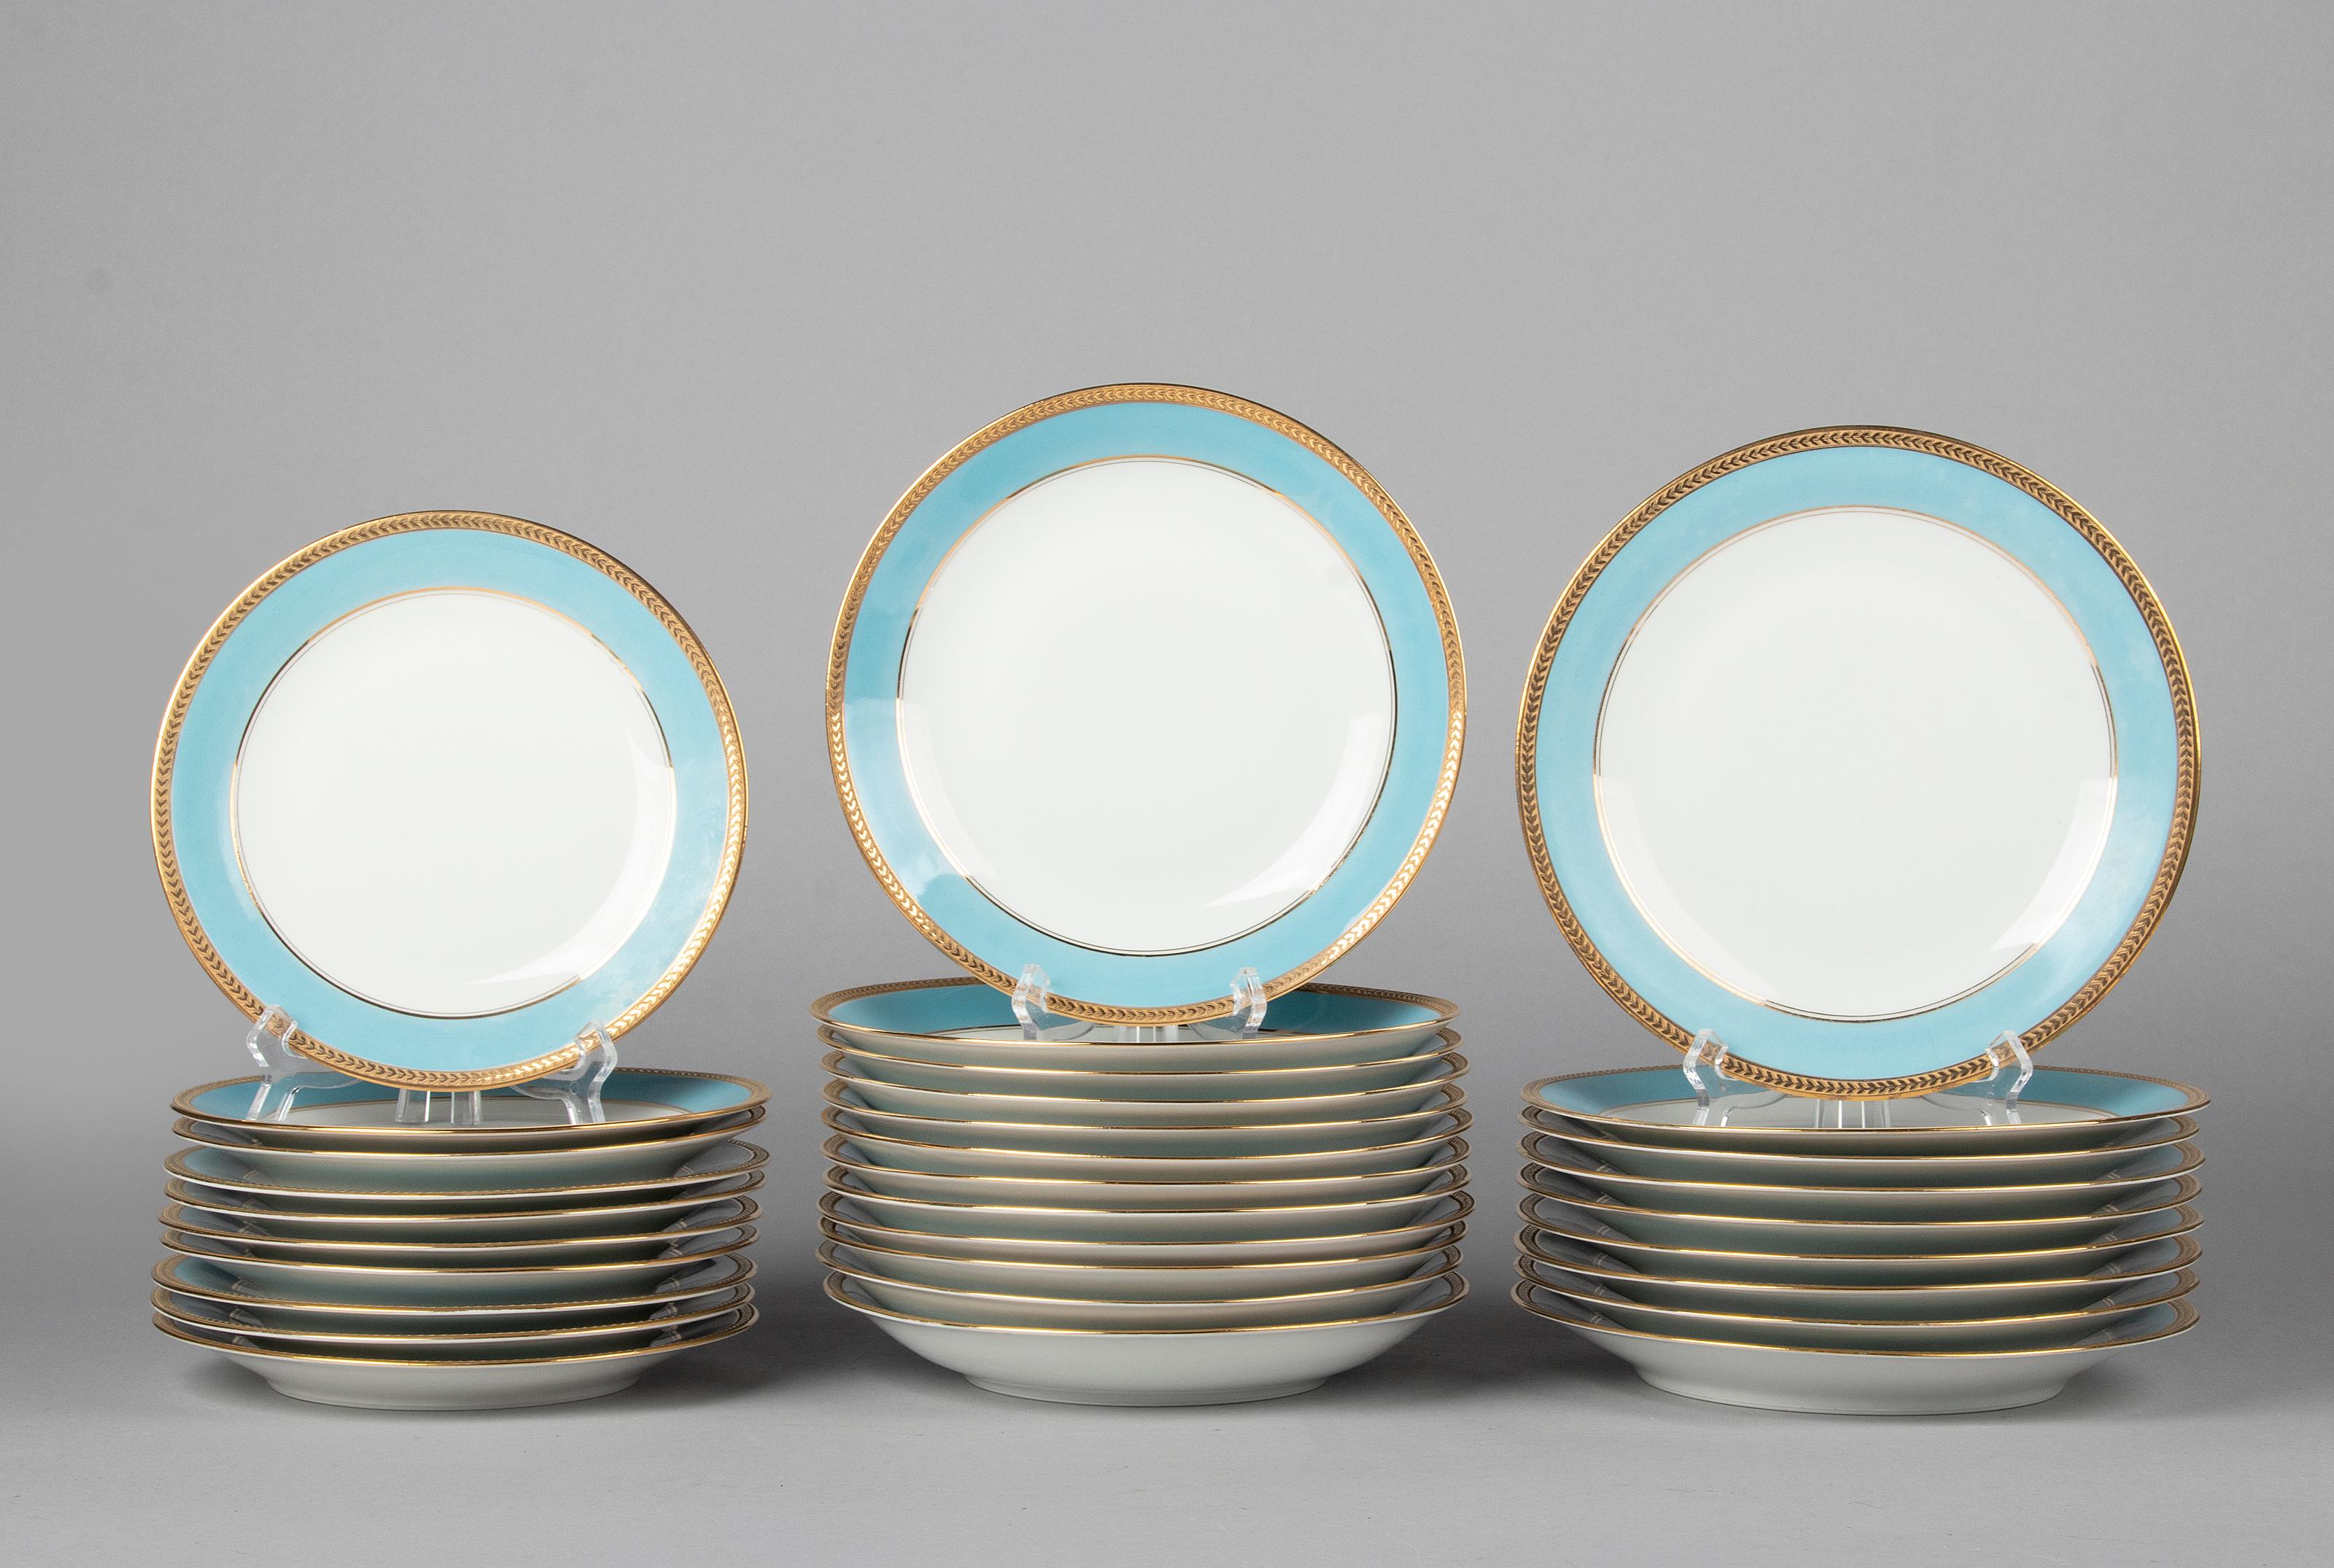 Empire 34-Piece Early 20th Century Porcelain Tableware by Limoges